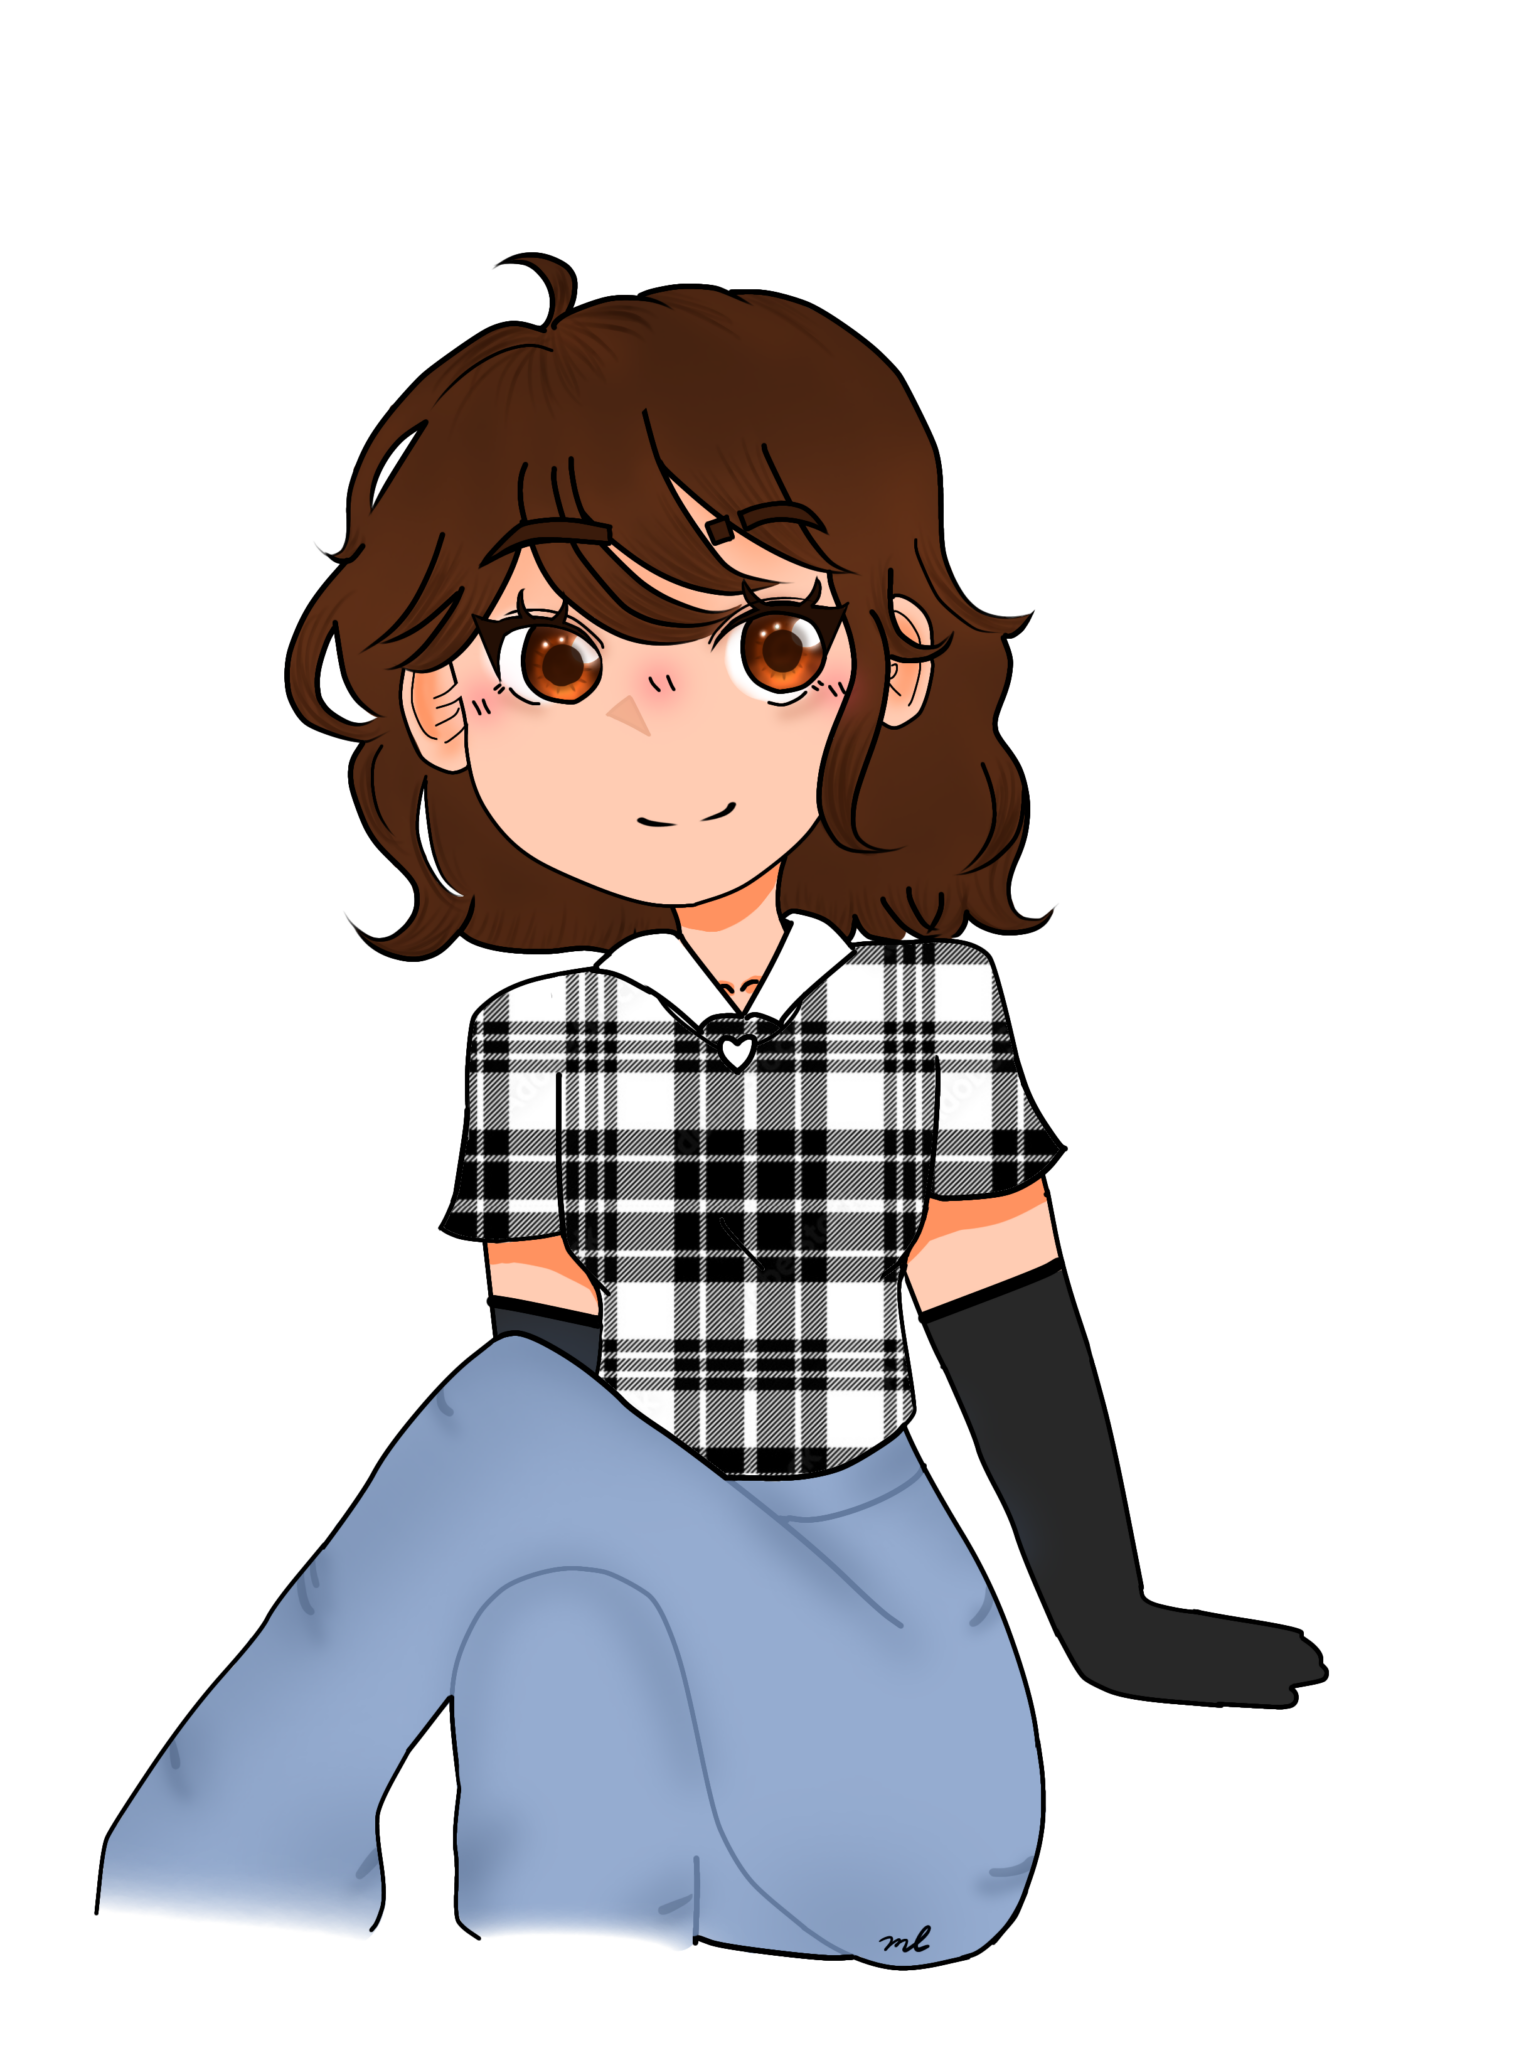 Anime drawing of girl sitting, wearing blue jeans and a black and white plaid top